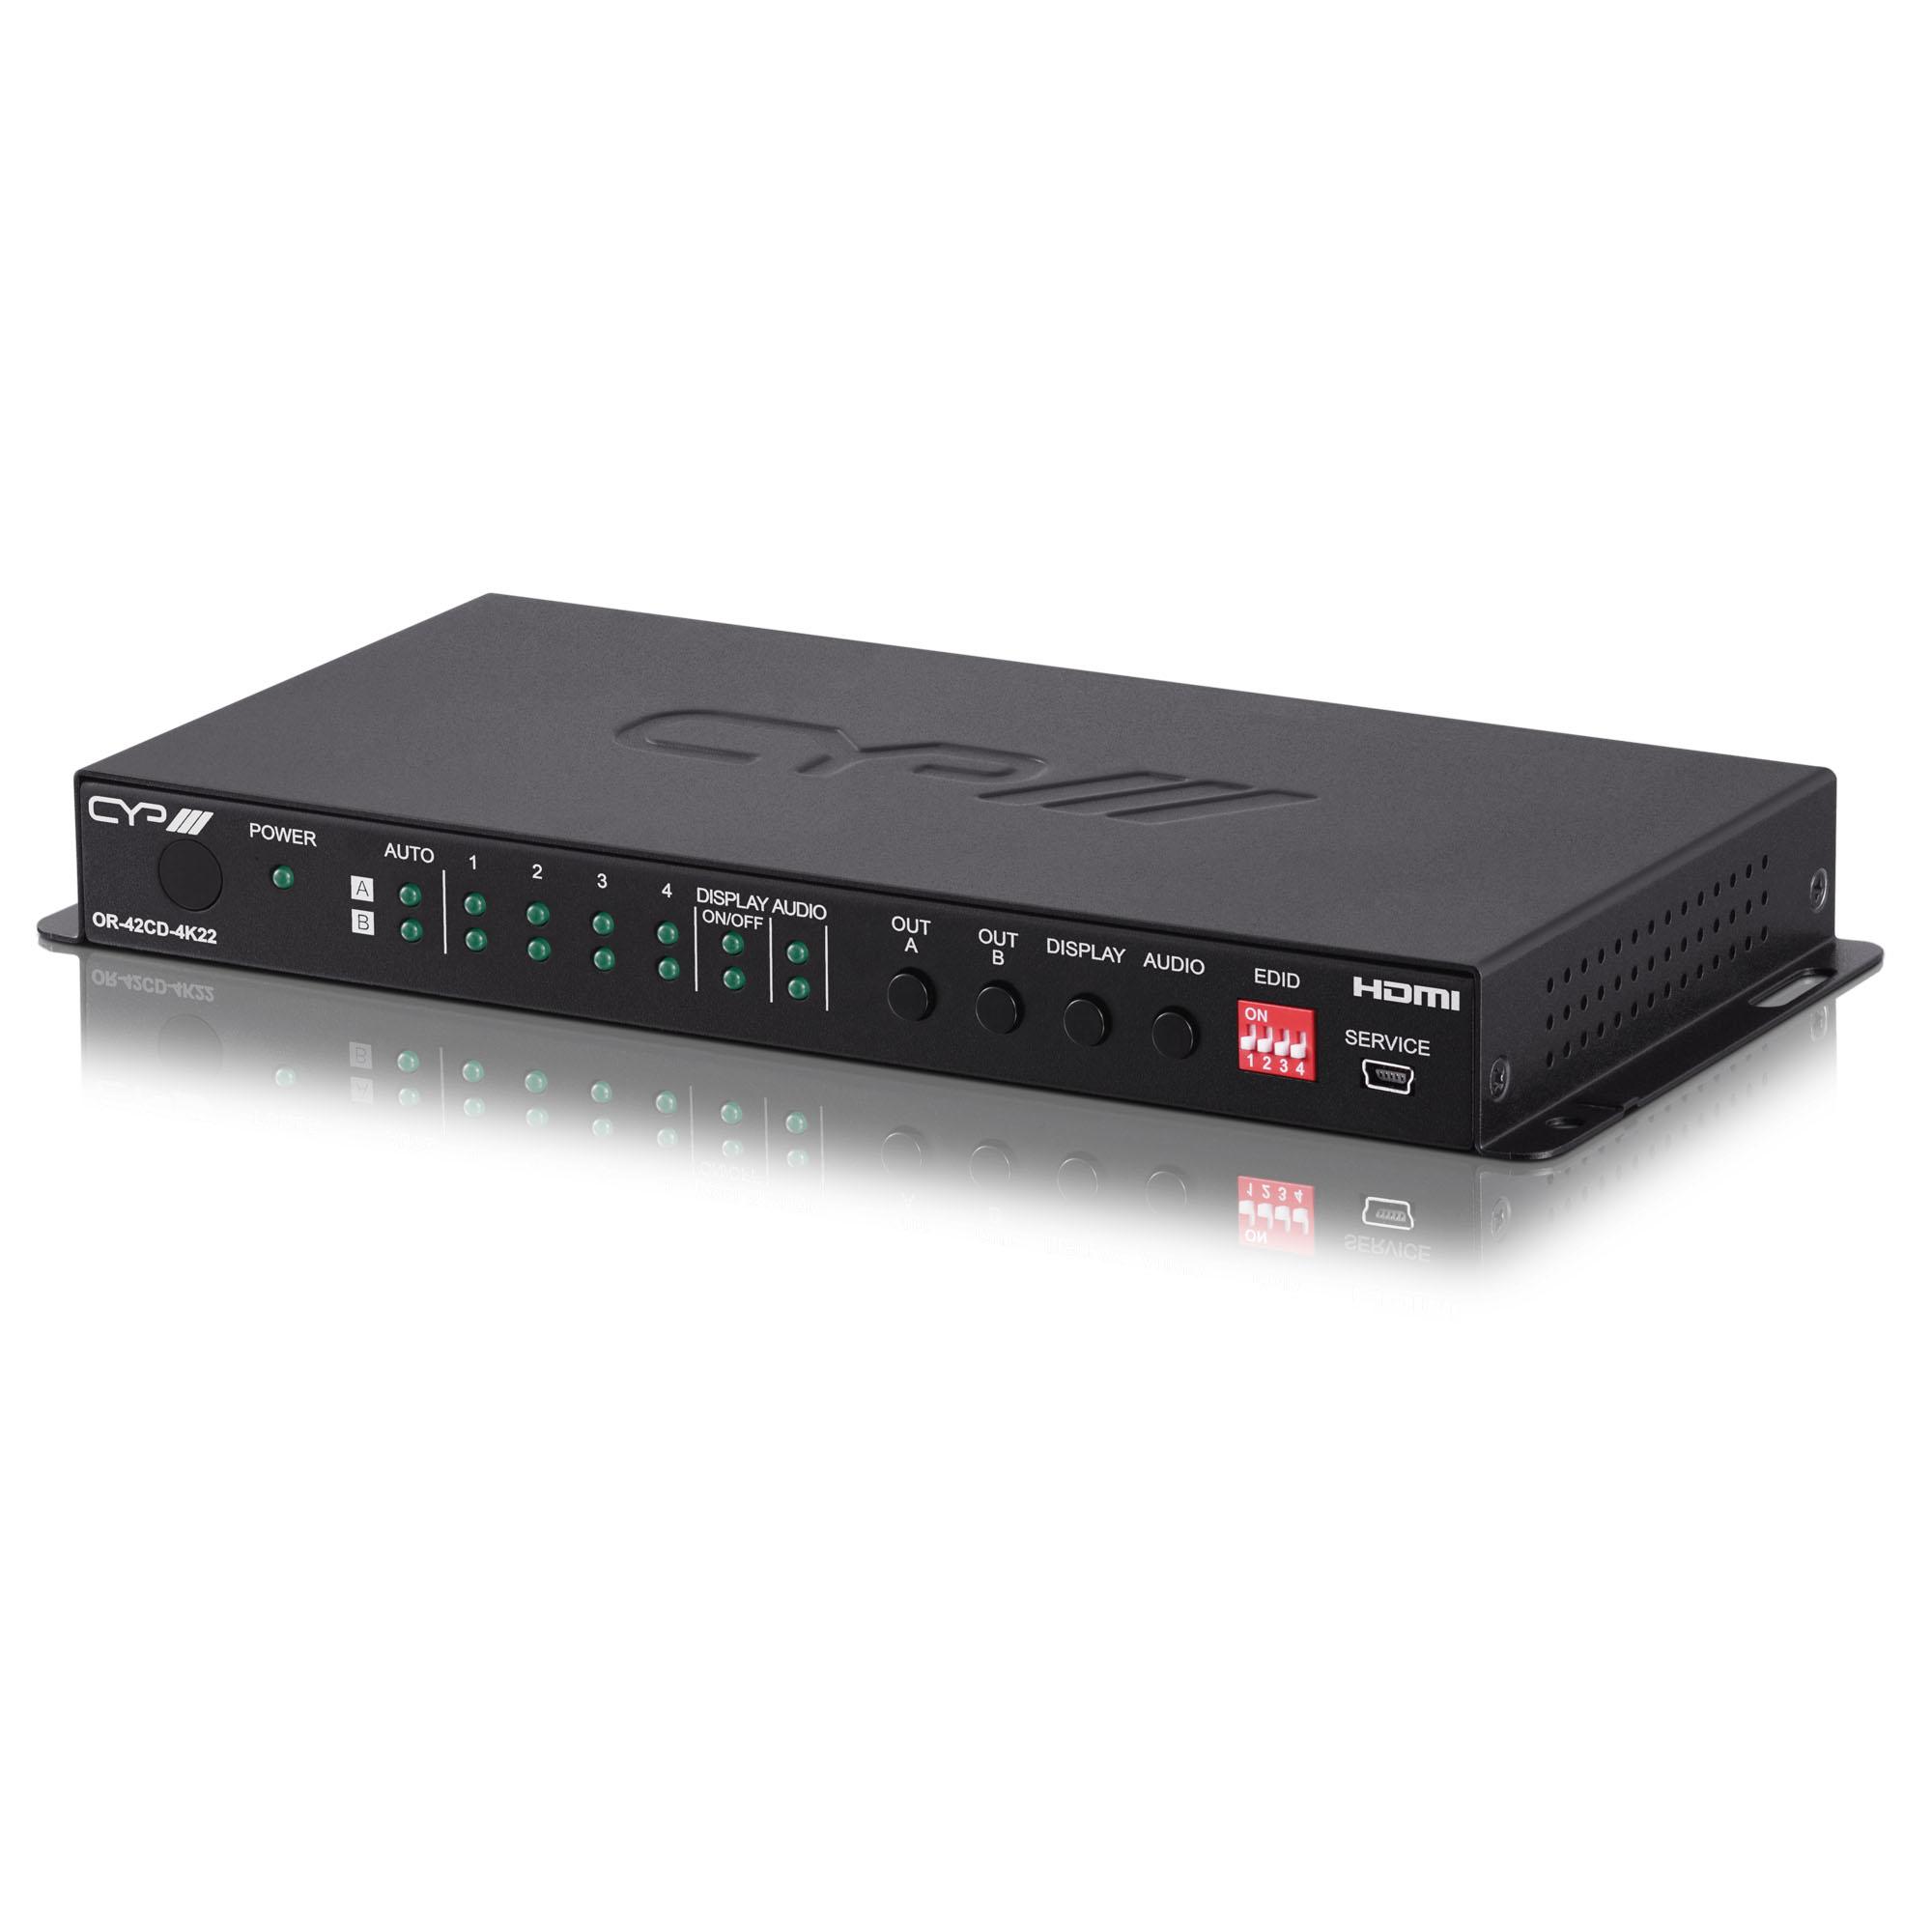 OR-42CD-4K22 4 x 2 HDMI Matrix Switcher with Audio Output (4K, HDCP2.2, HDMI2.0)